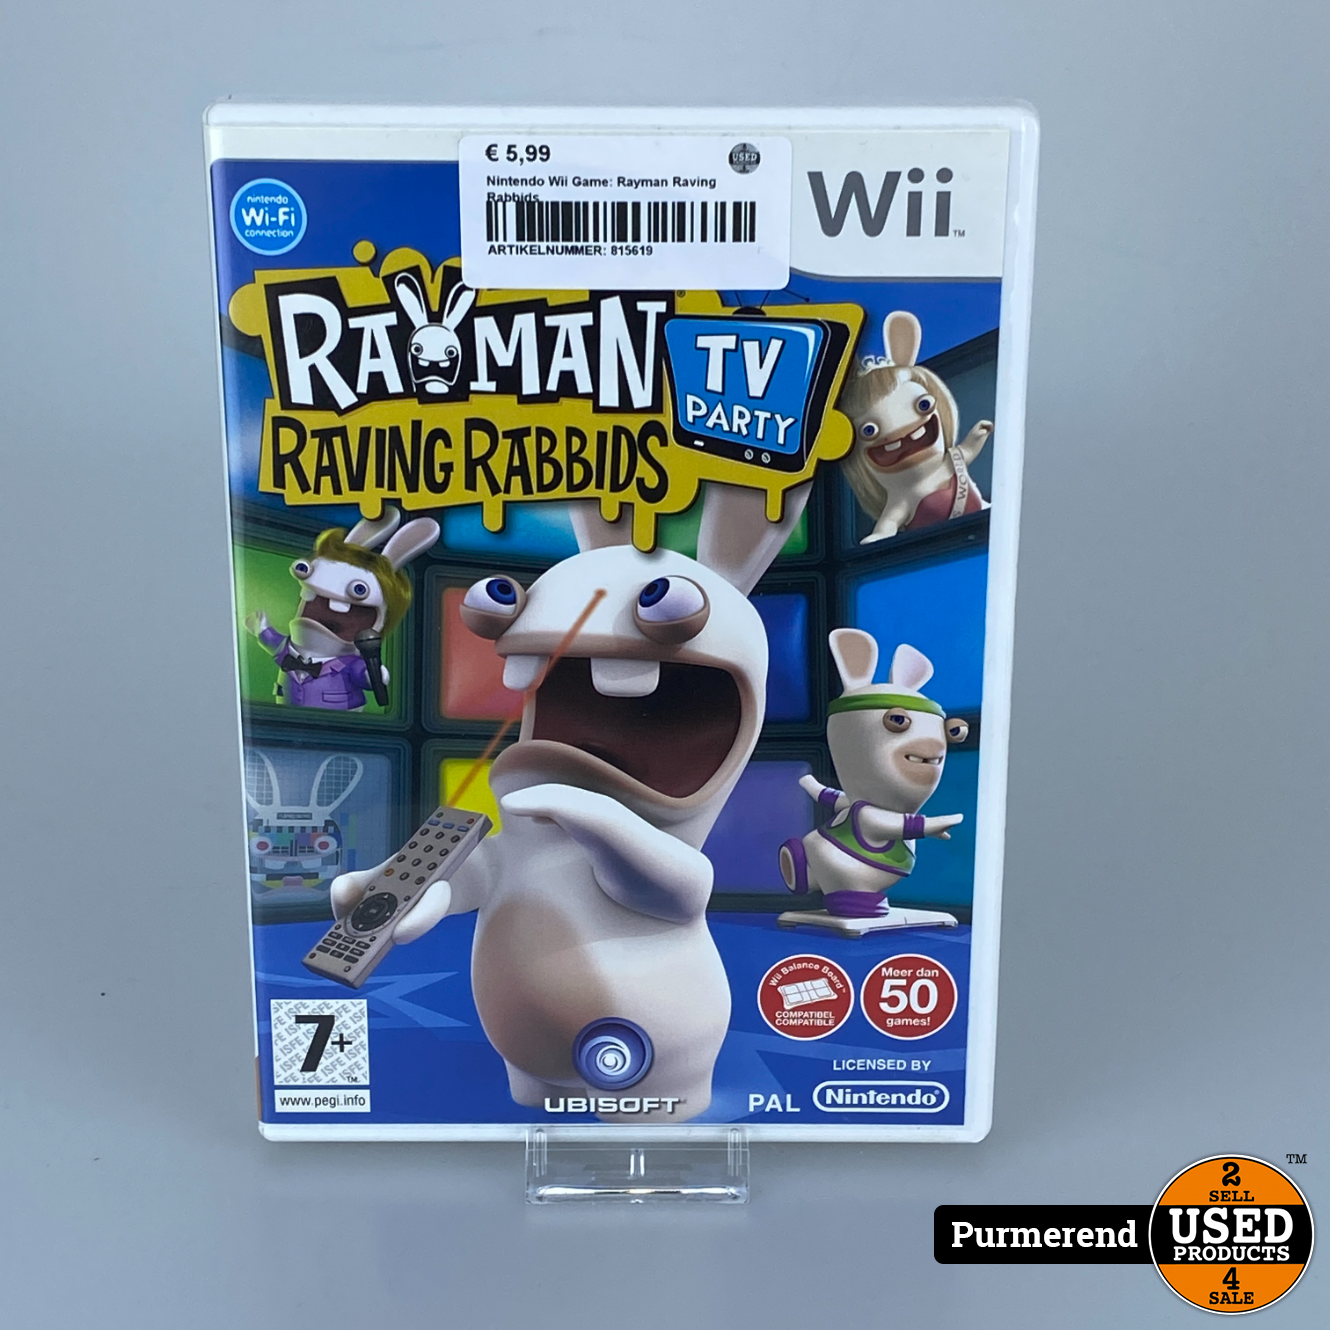 Nintendo Wii Rayman Raving - Used Products Purmerend